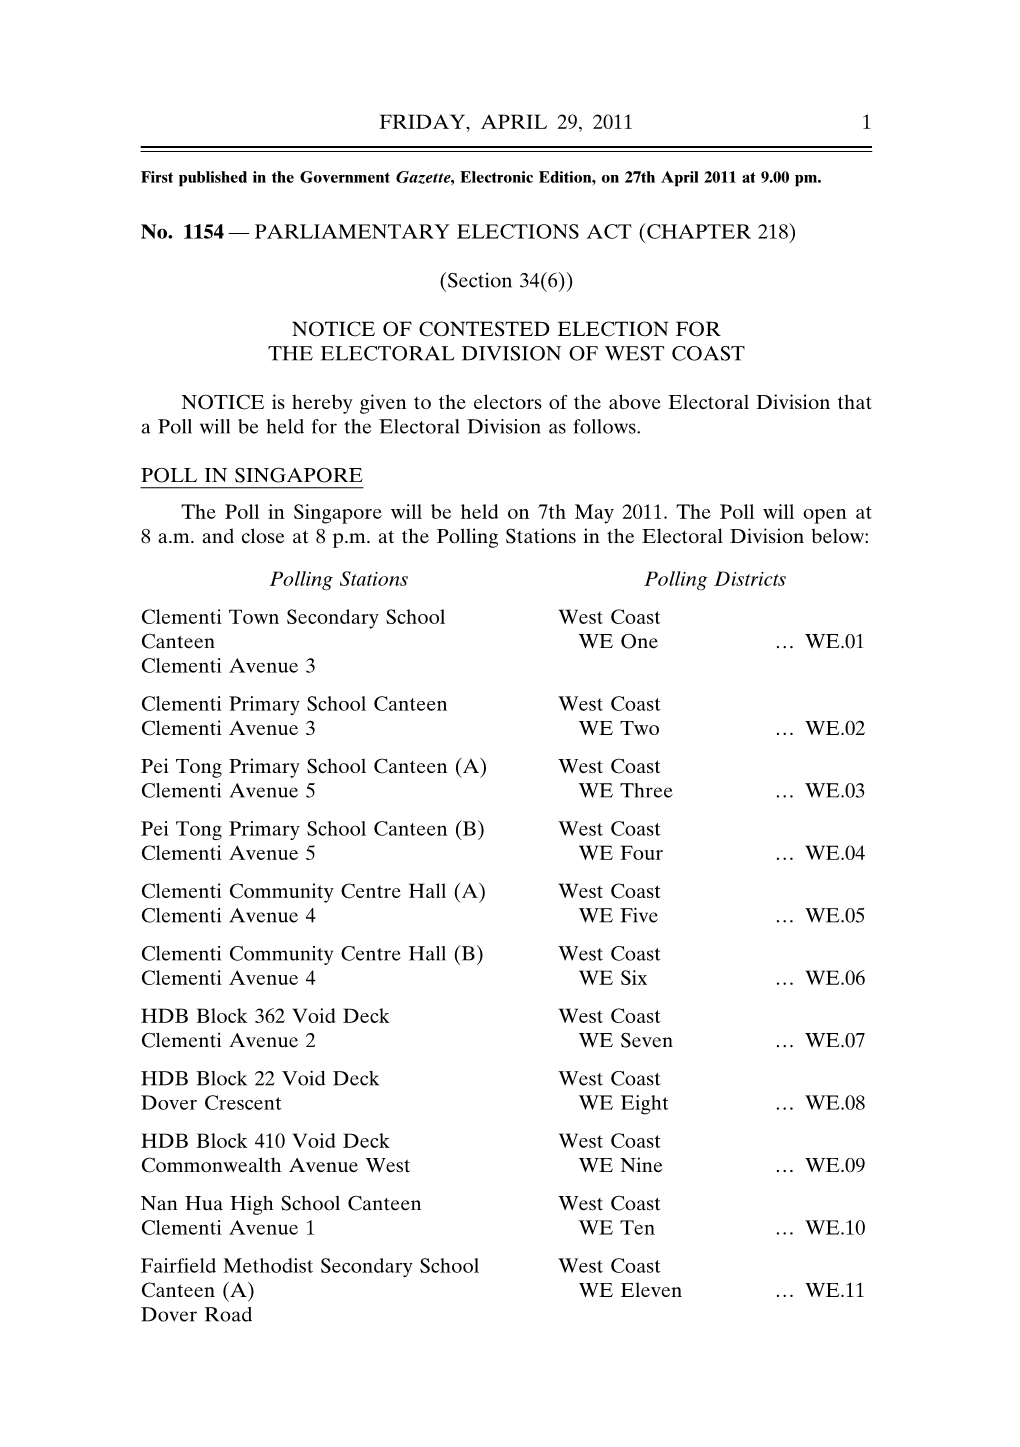 Notice of Contested Election for the Electoral Division of West Coast